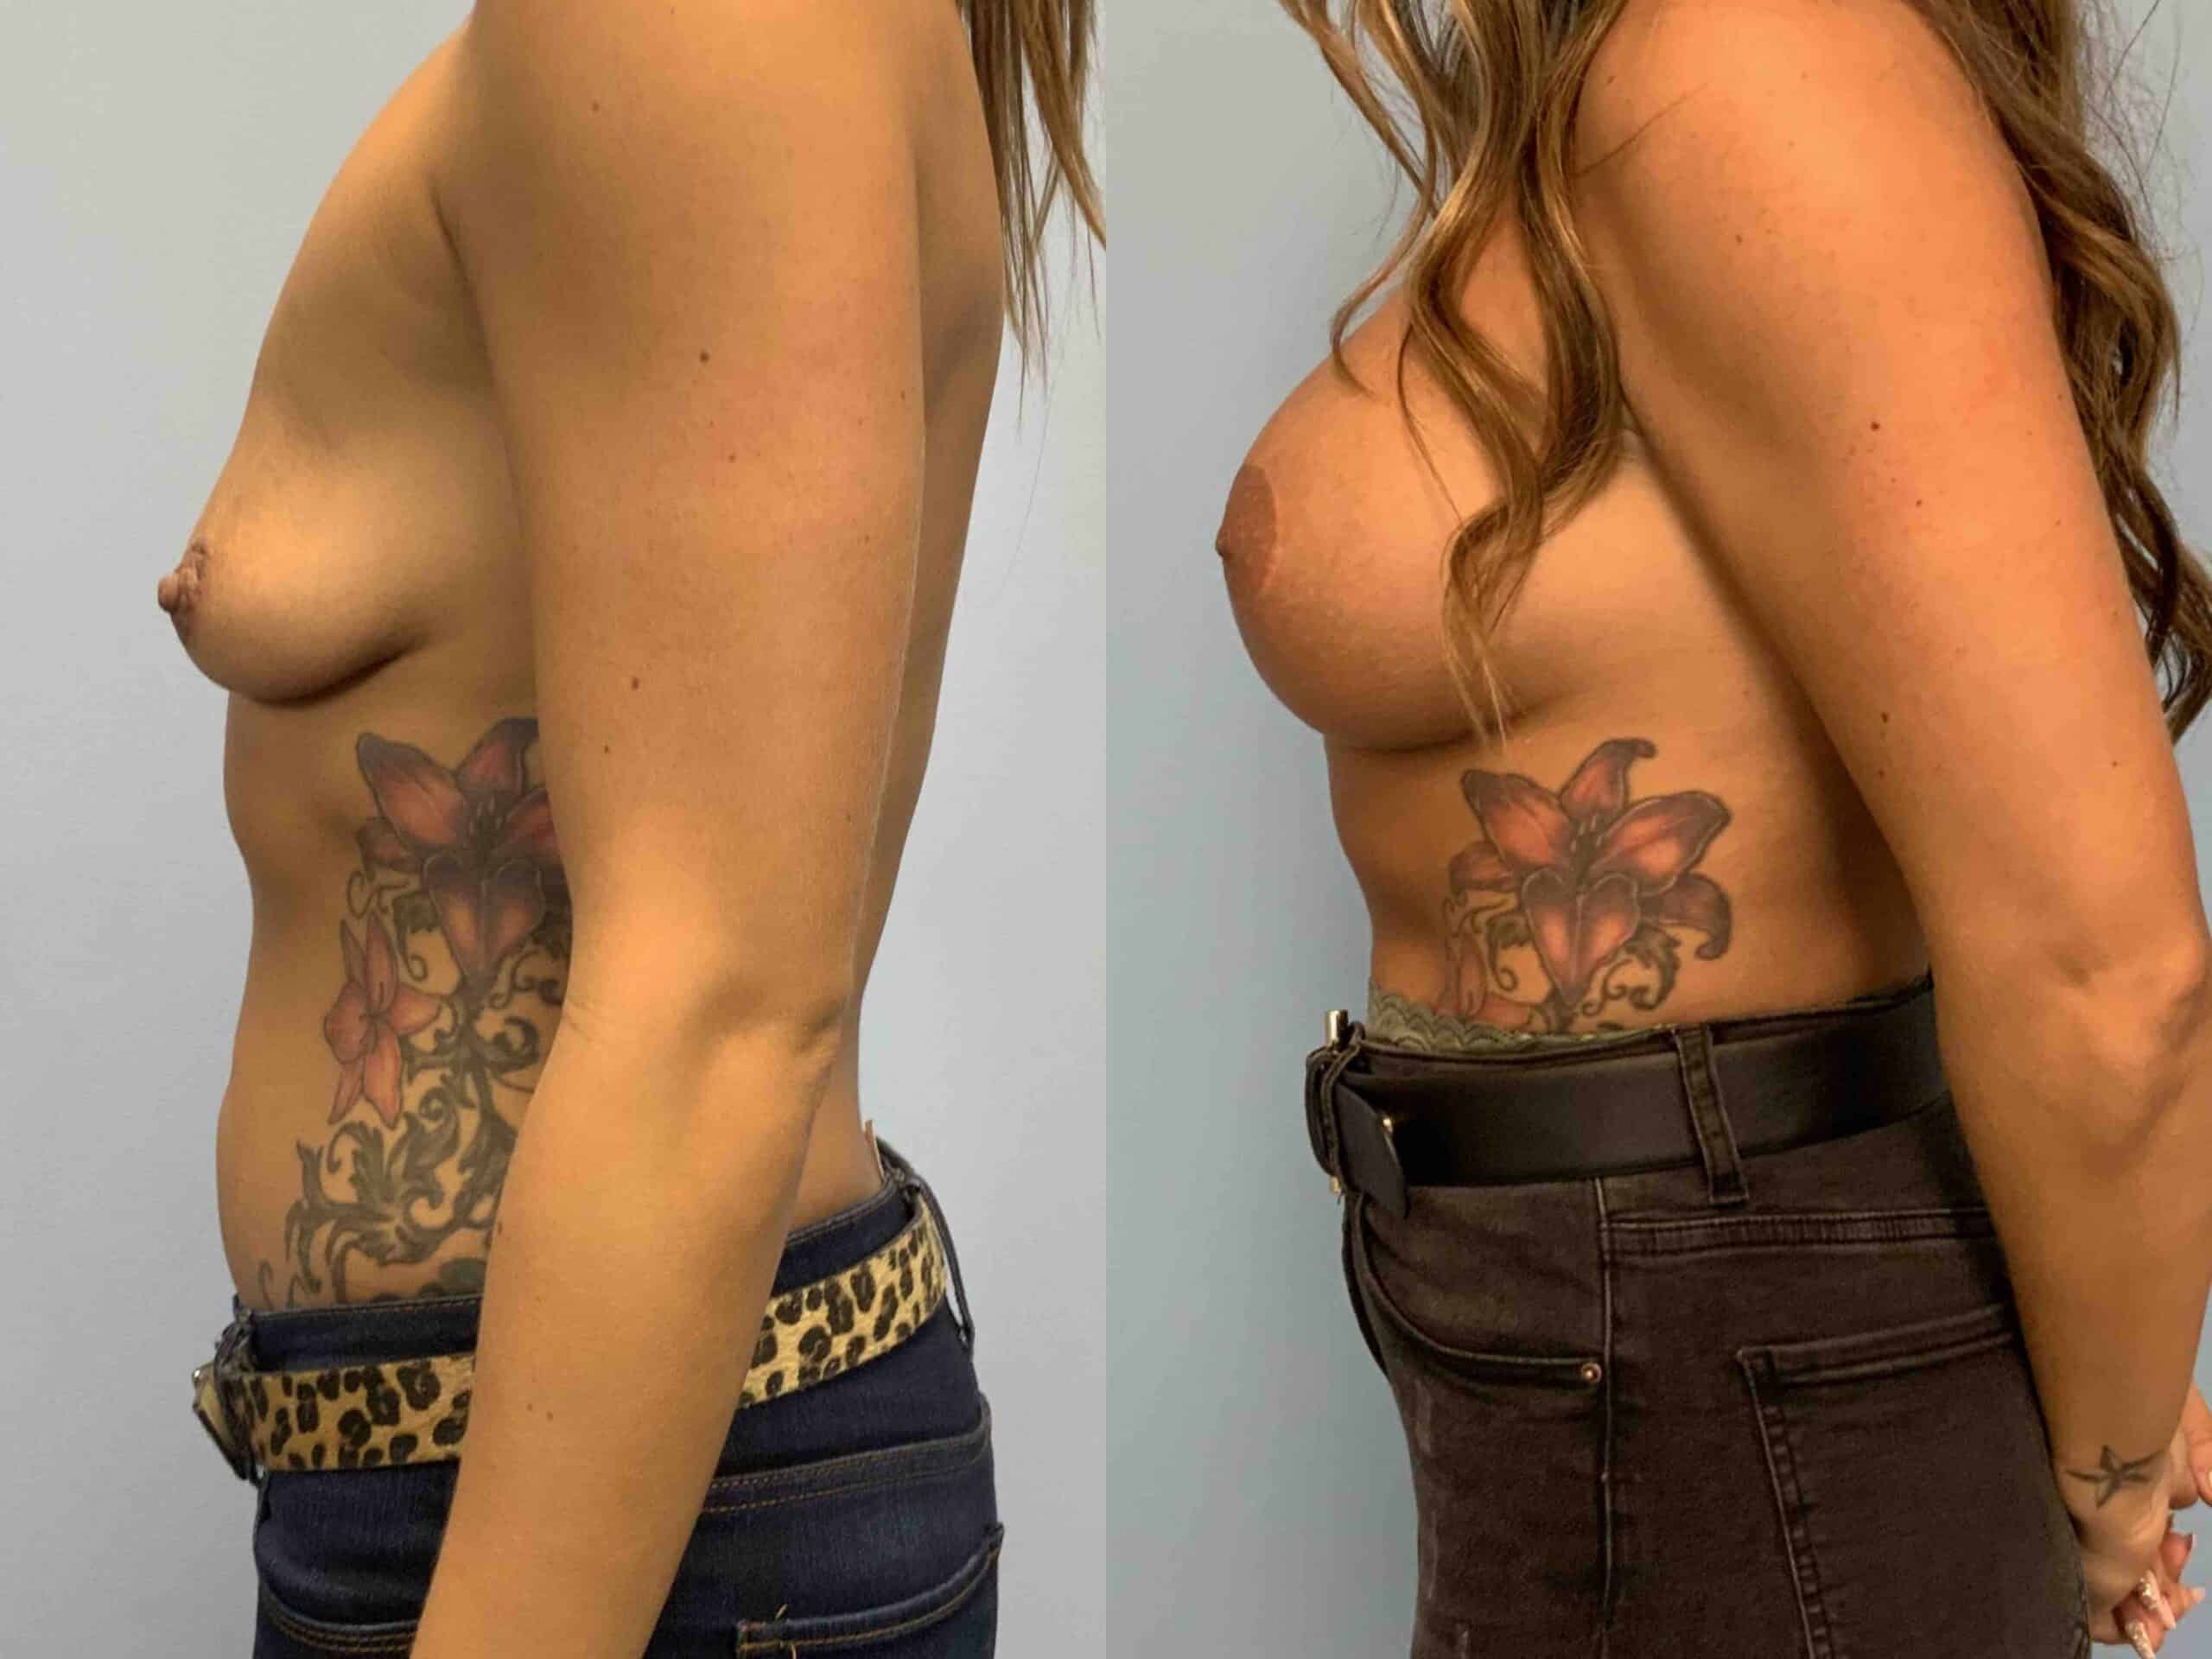 Before and after, 1 yr post op from Breast Augmentation with Breast Lift/Wise pattern Mastopexy performed by Dr. Paul Vanek (side view)